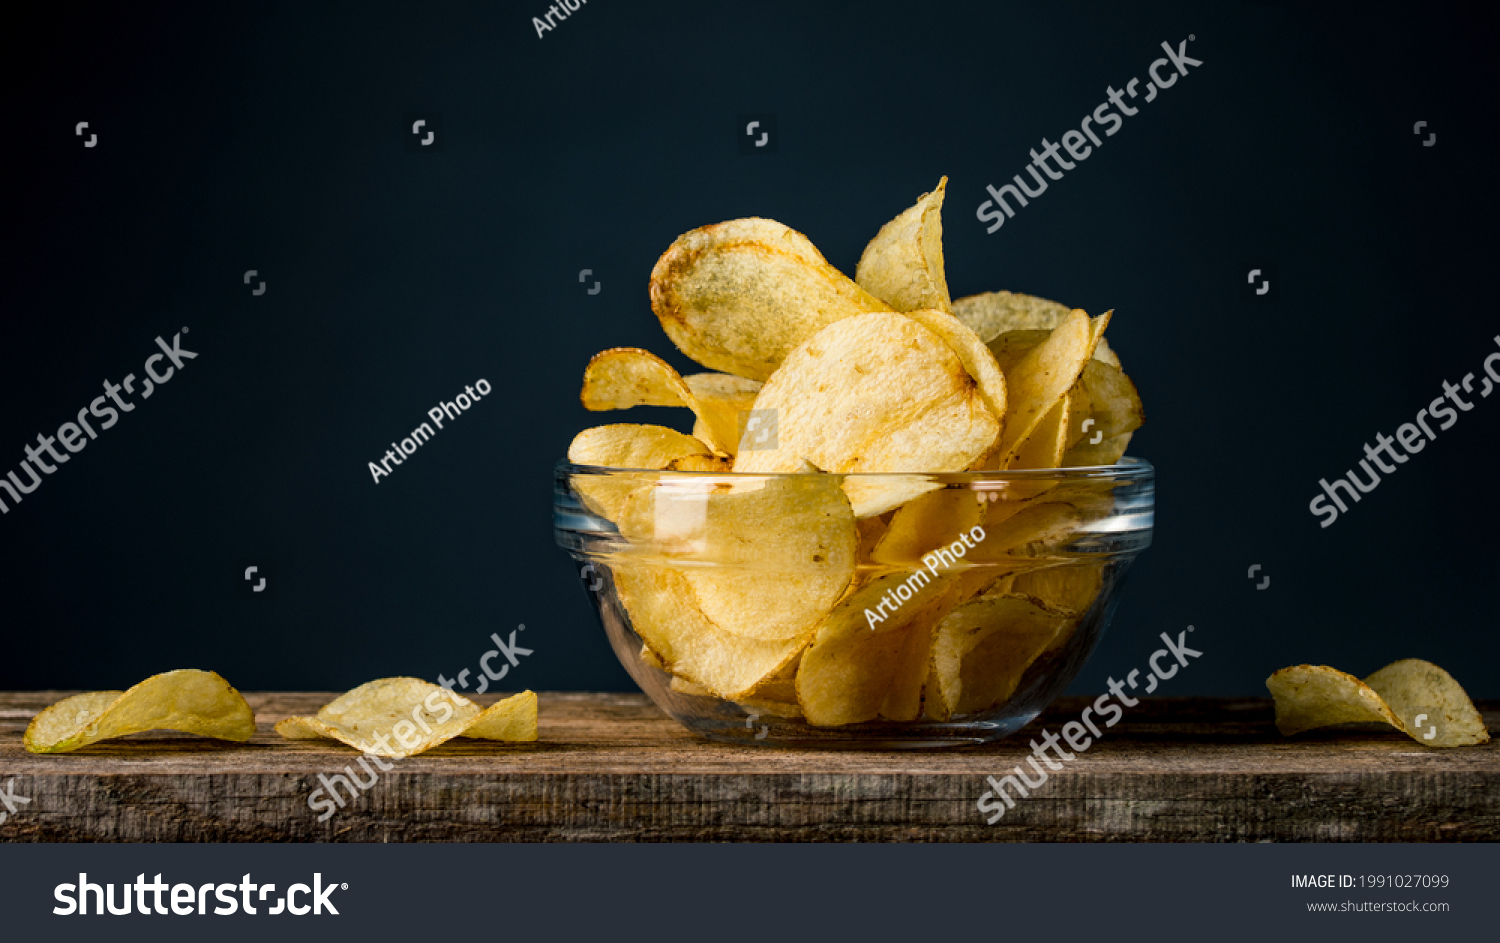 Potatoes Chips. Chips in glass bowl good for snack for beer or ale on natural wooden table. Good for beer festival, pub, restaurant advertising. Food and Drink photography. Macro high resolution Photo #1991027099